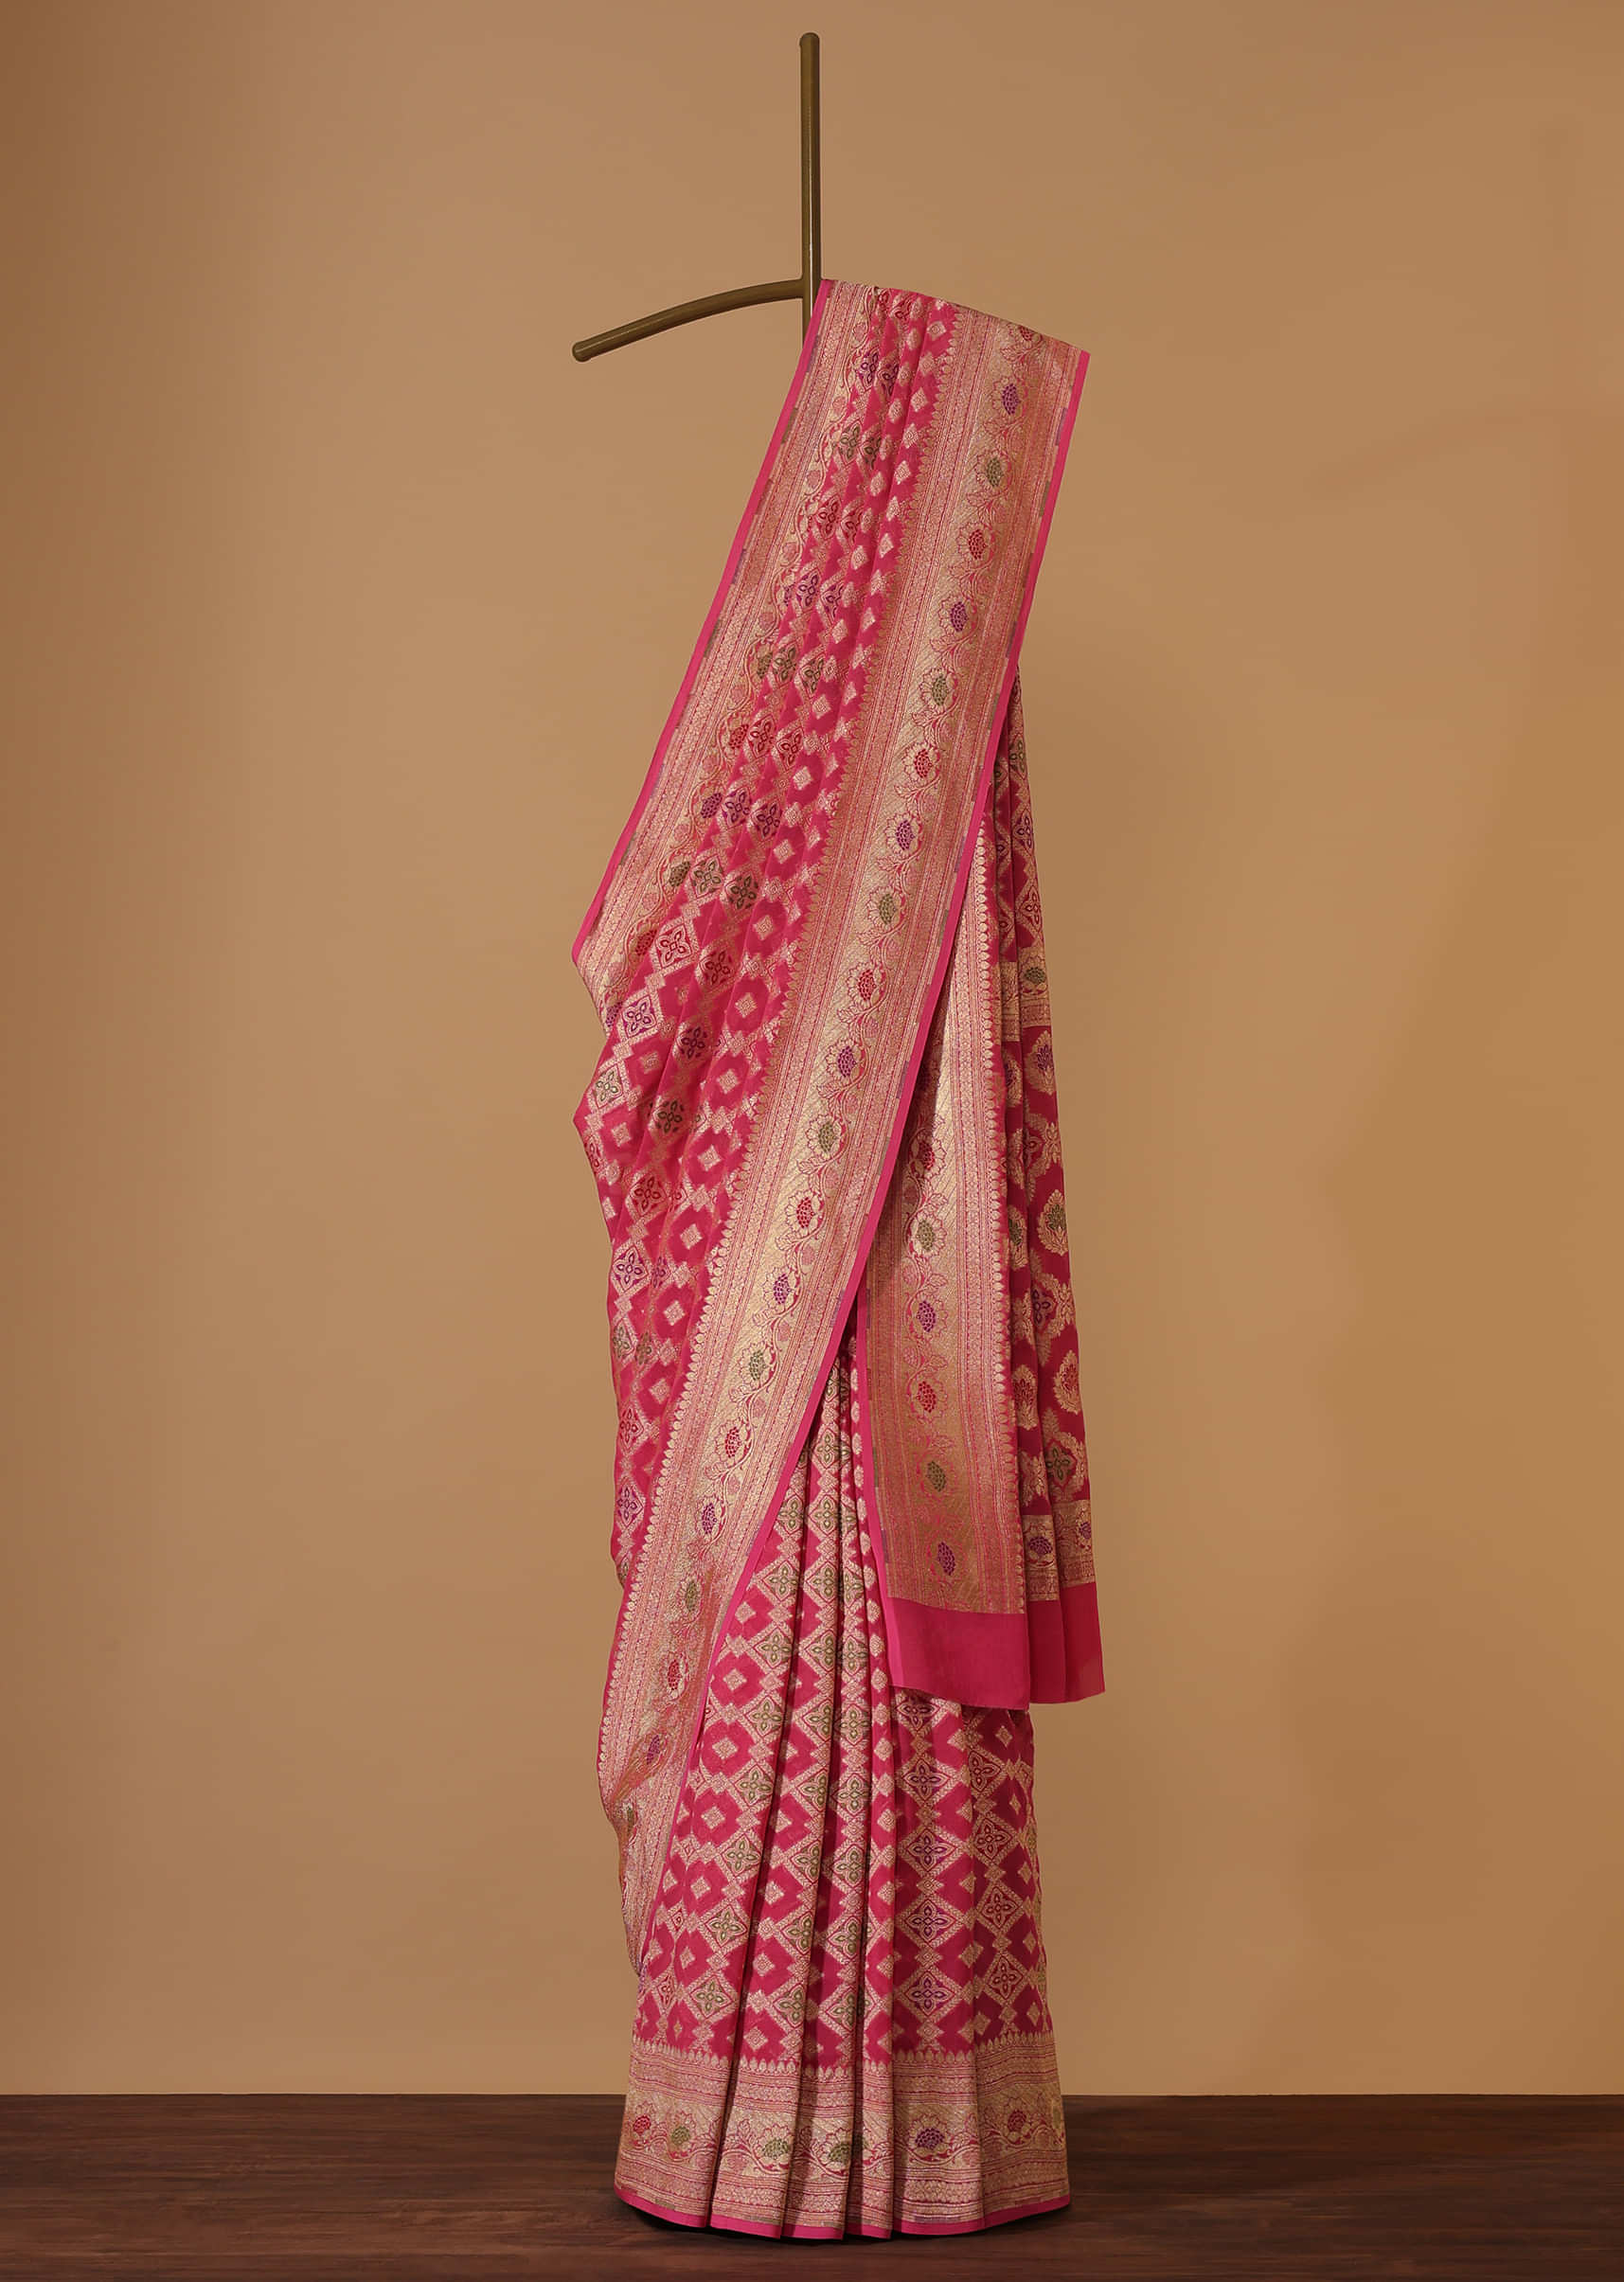 Hot Pink Woven Georgette Saree